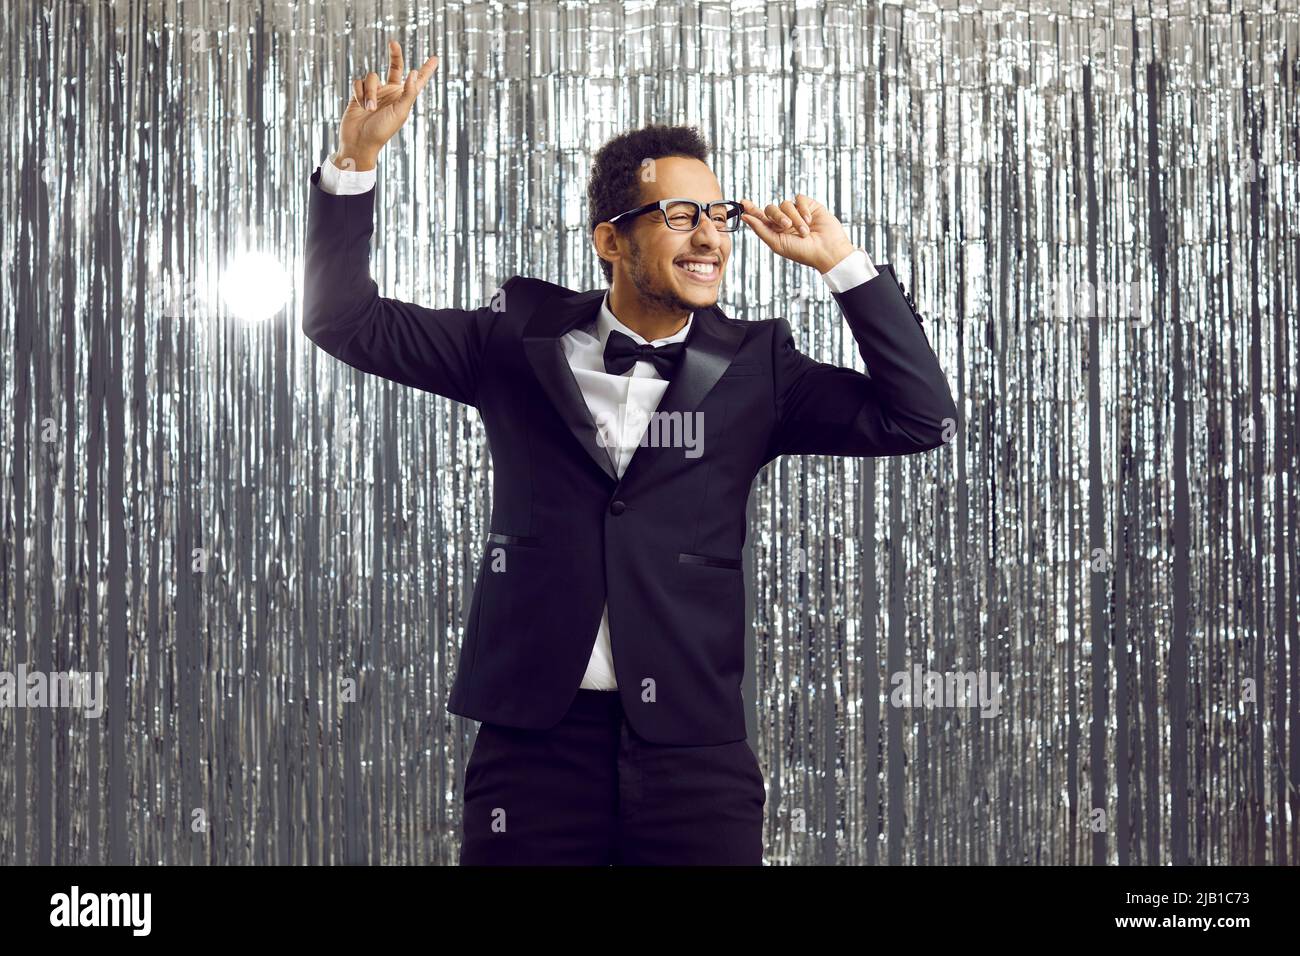 Happy funny young ethnic man in tuxedo suit dancing and having fun at disco party Stock Photo